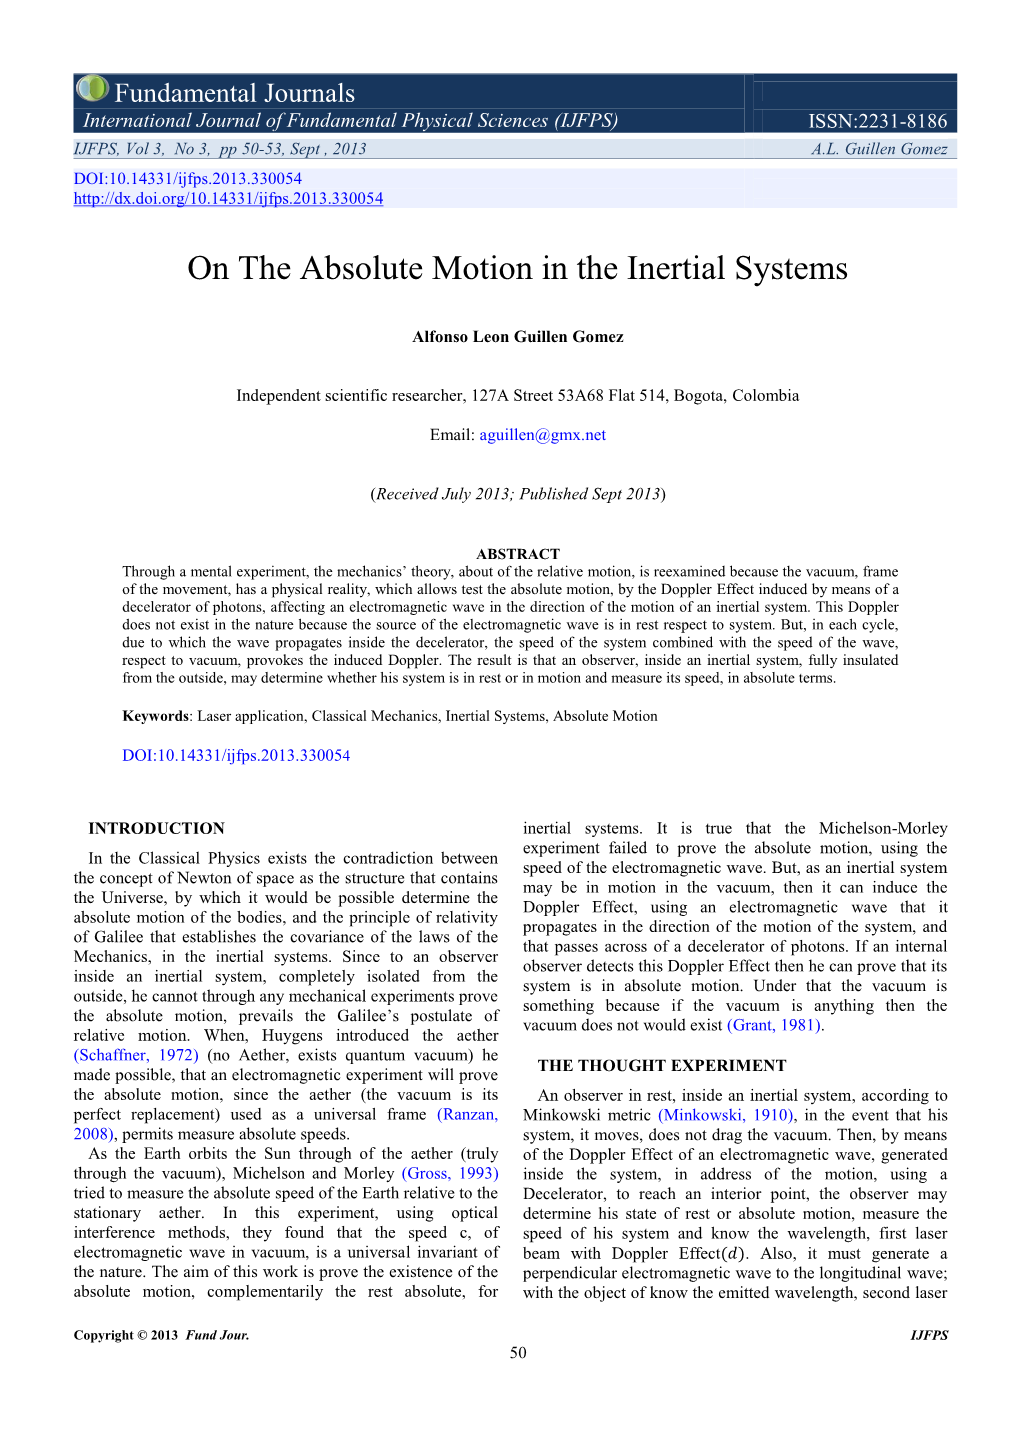 On the Absolute Motion in the Inertial Systems